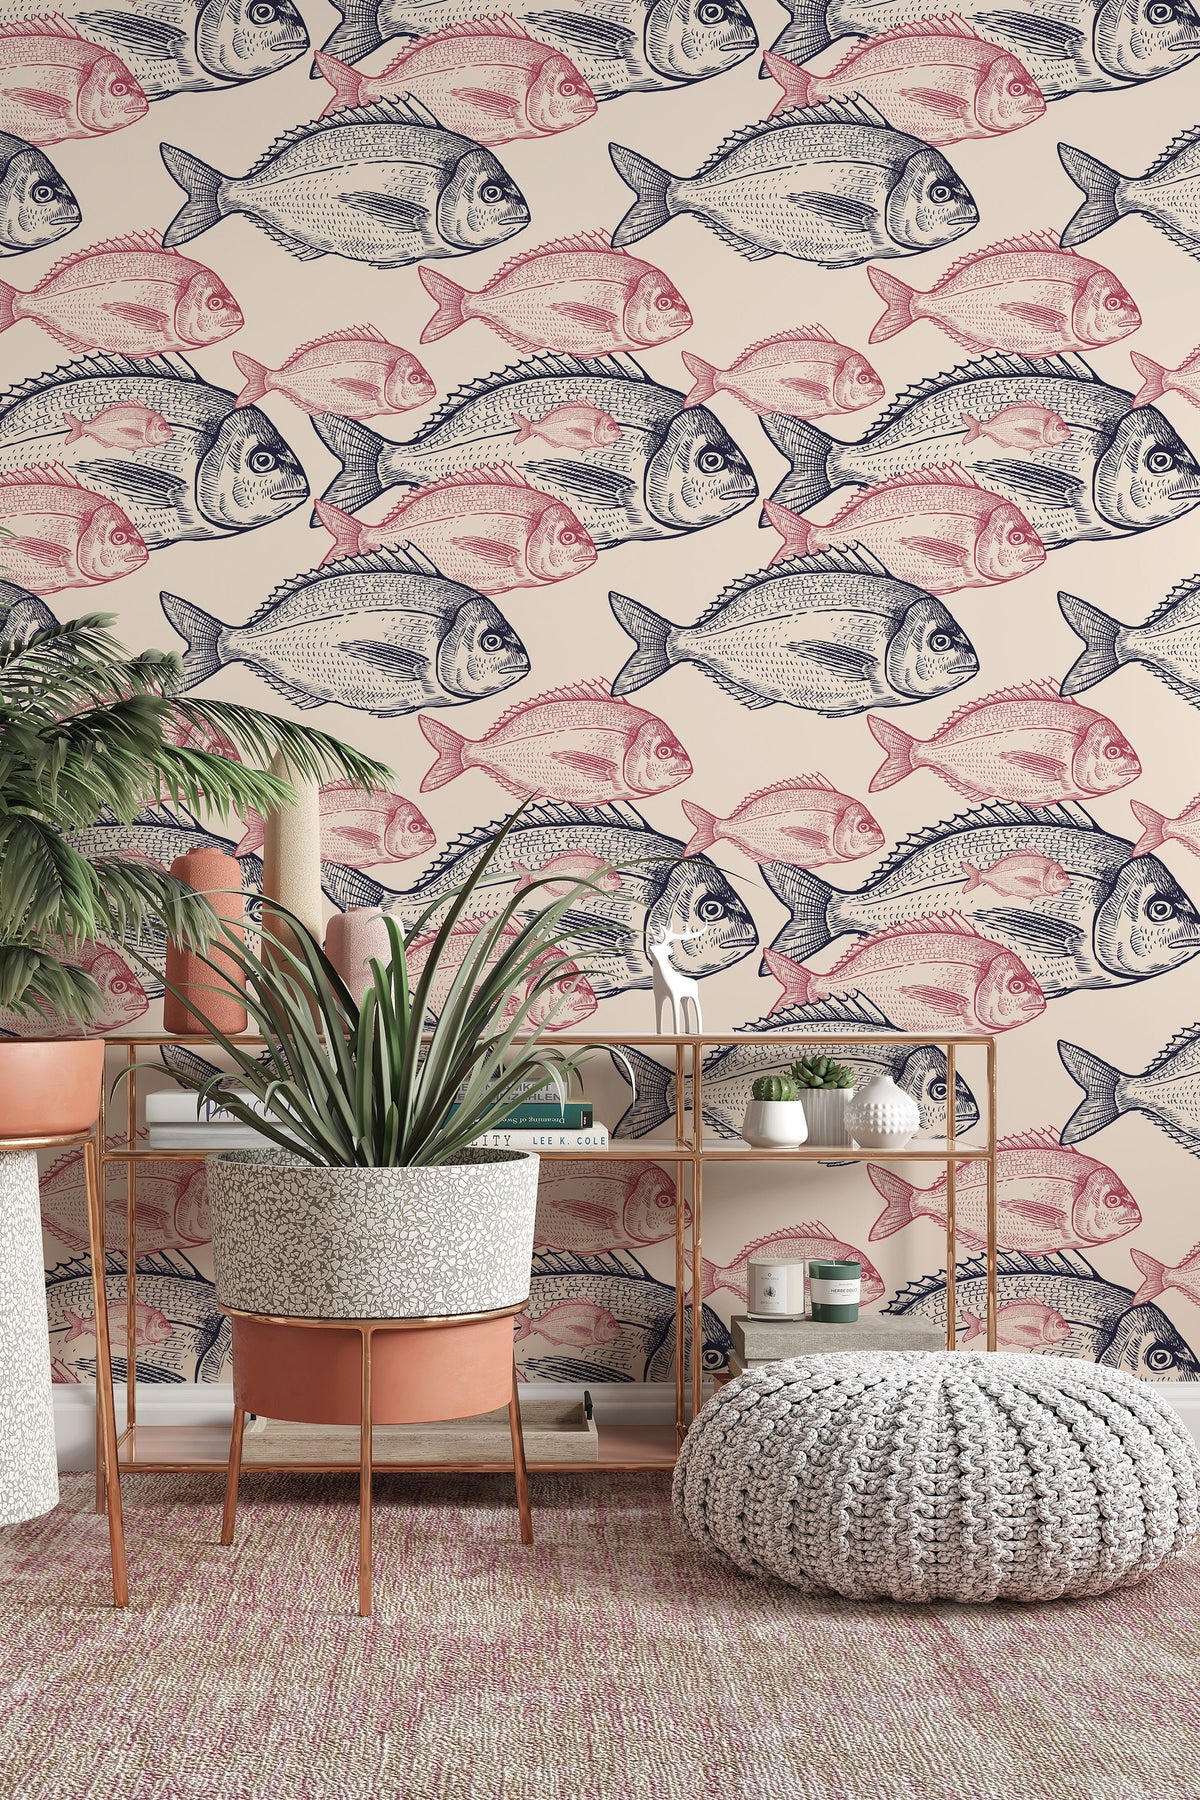 RoomMates 2829sq ft Blue Vinyl Fish Selfadhesive Peel and Stick Wallpaper  in the Wallpaper department at Lowescom